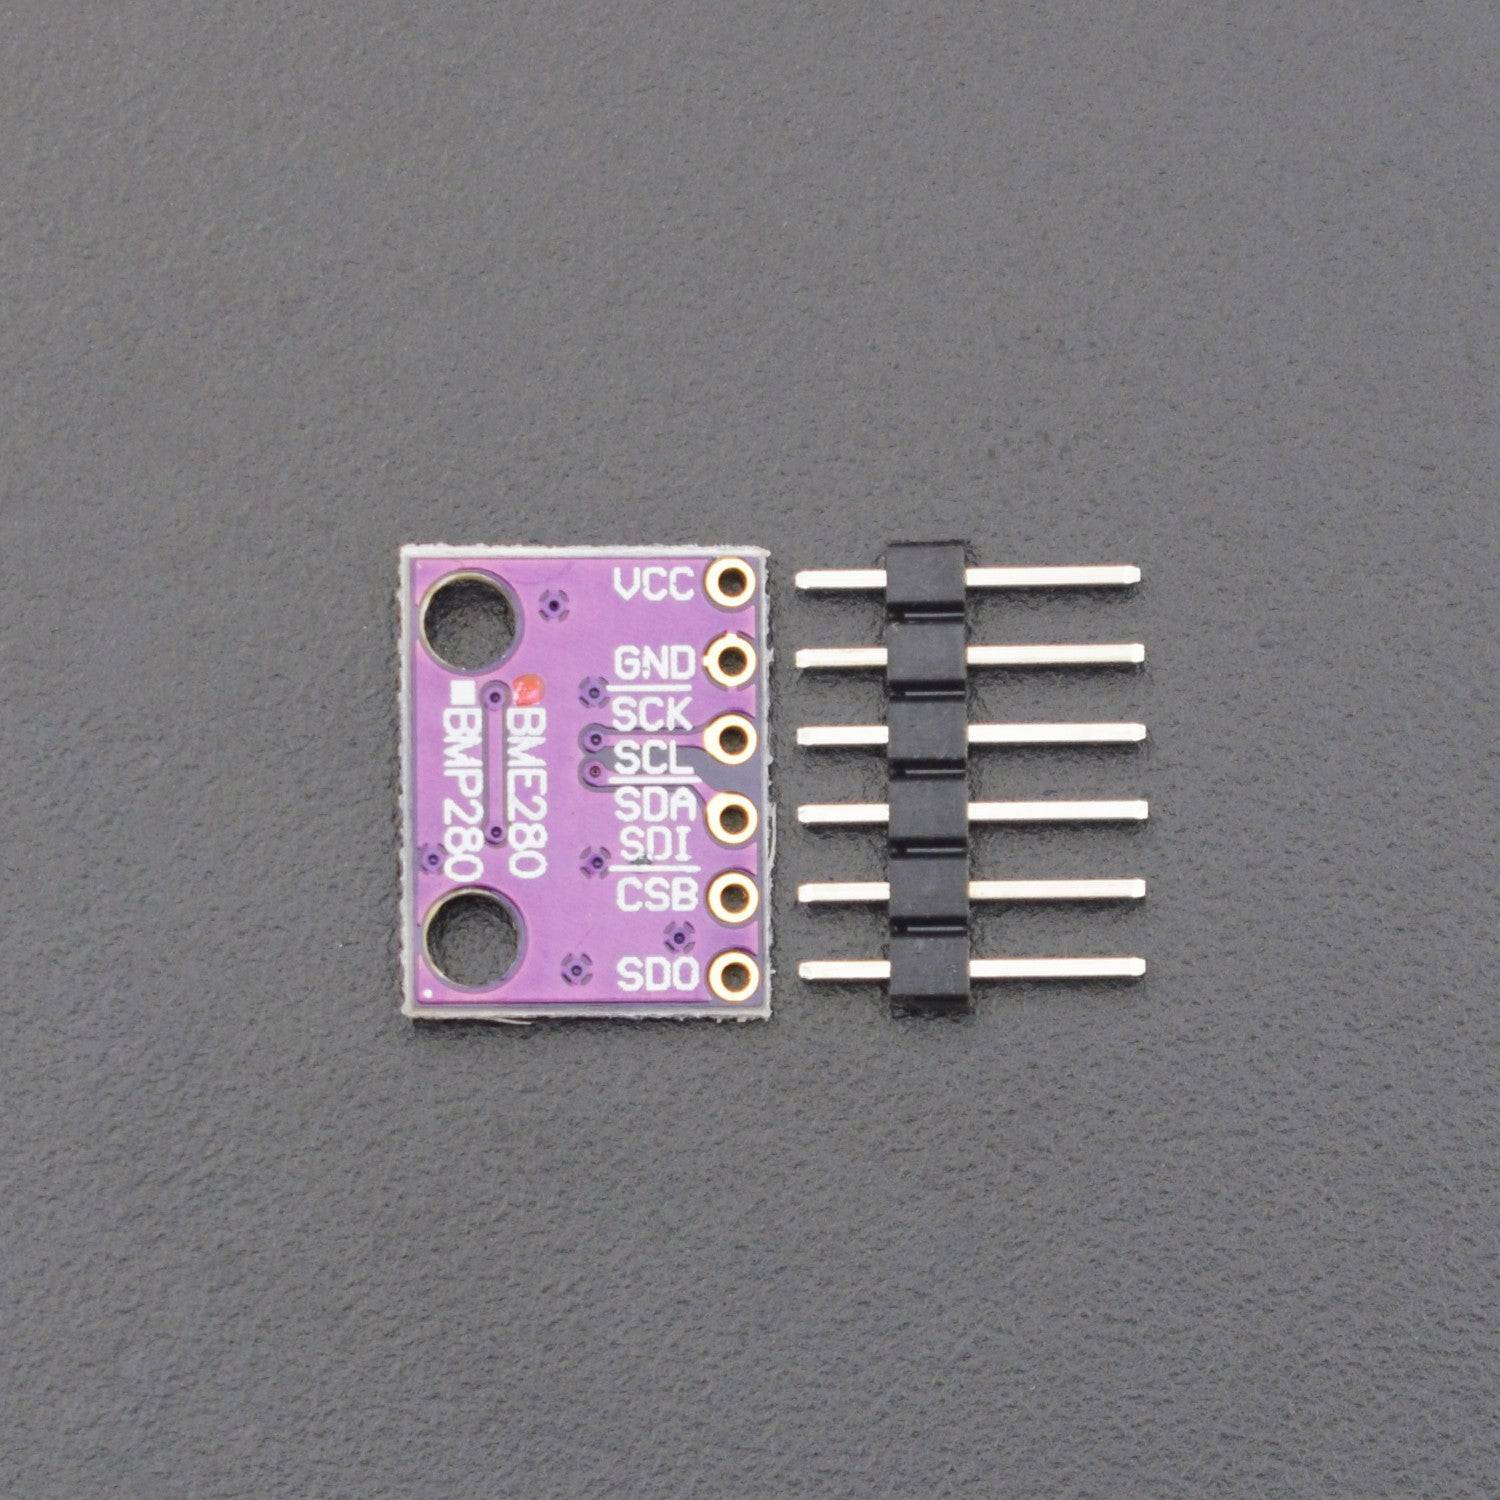 GY-BME280-3.3 High-precision atmospheric pressure altimeter I2C SPI Breakout Barometric Temperature Humidity Module -RS1118 - REES52